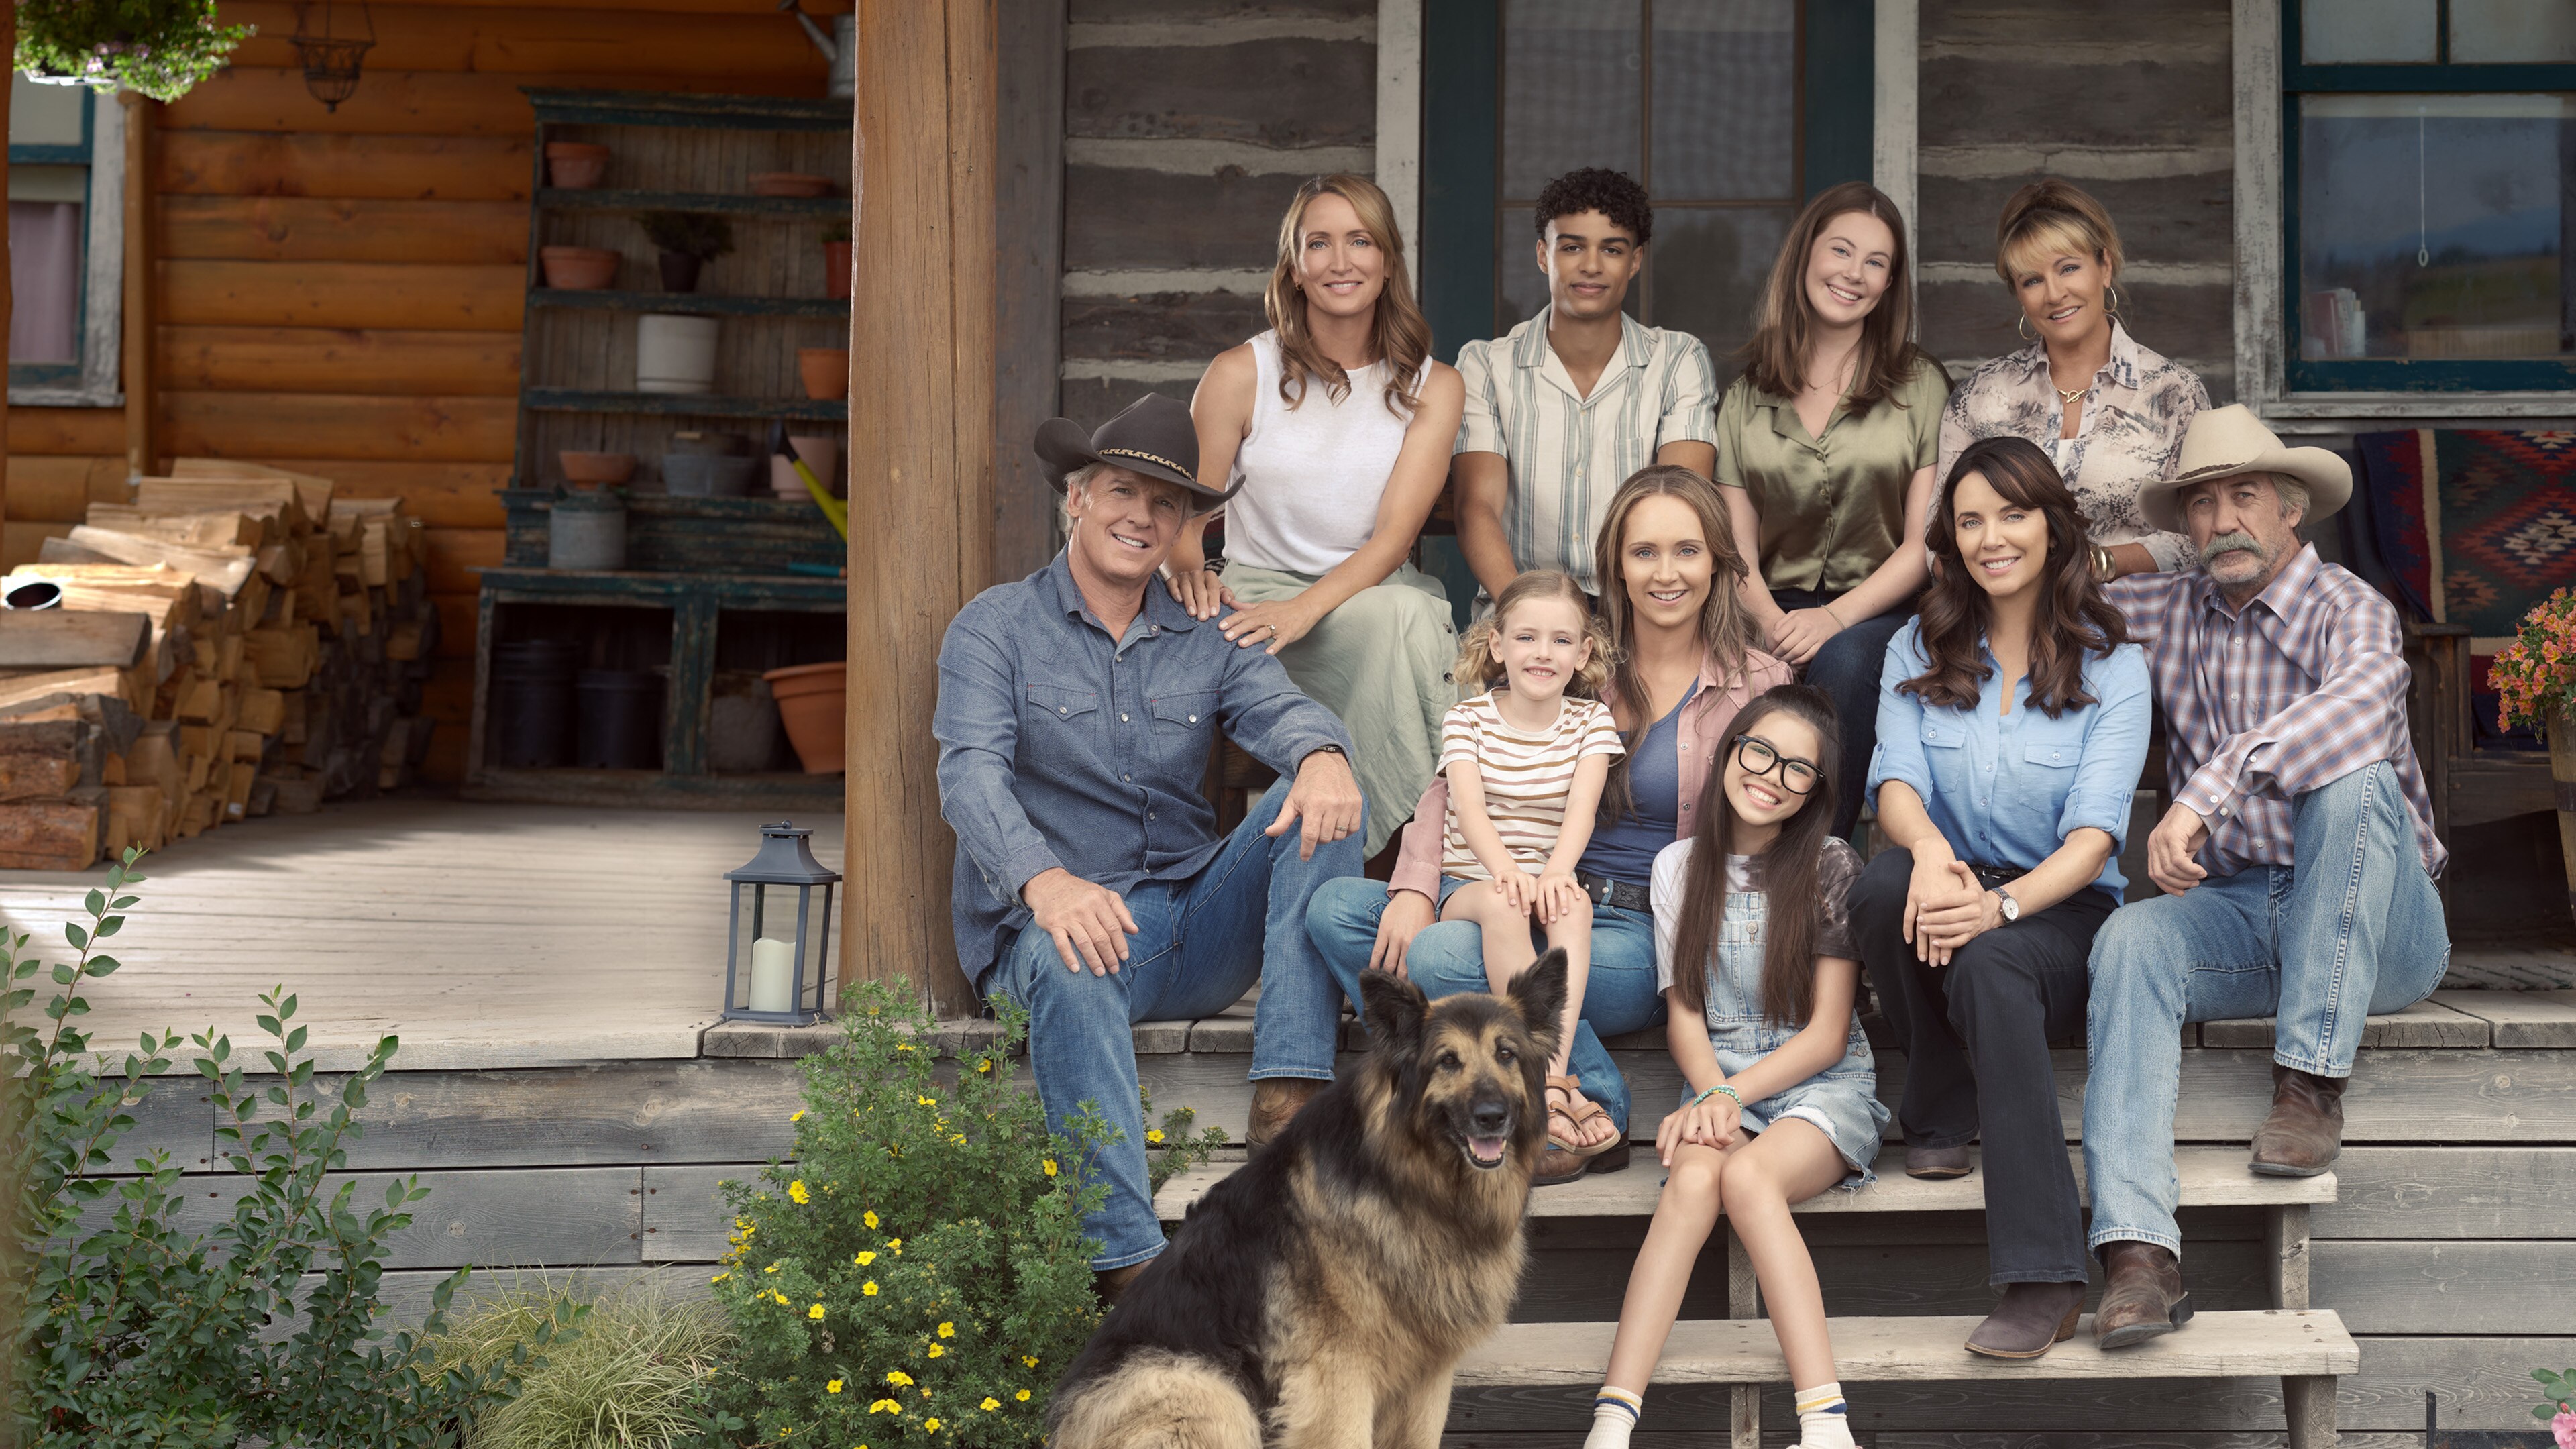 EXCLUSIVE: Watch 'Heartland' Season 15 - Now Streaming on UP Faith & Family  - YouTube